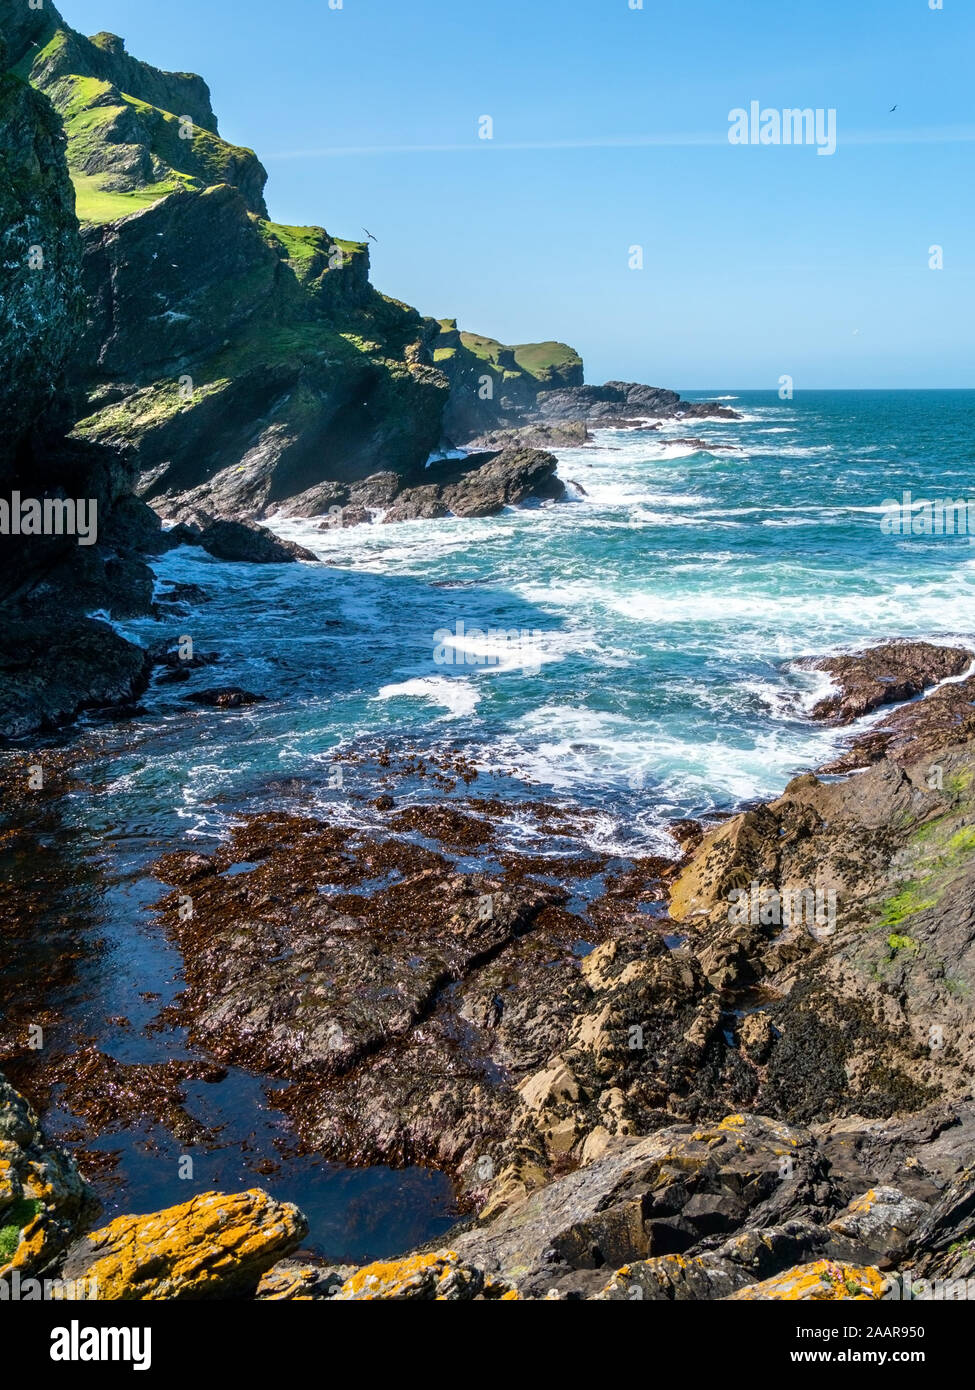 Sea cliffs, waves and surf at Pig's Paradise,Isle of Colonsay, Scotland, UK Stock Photo